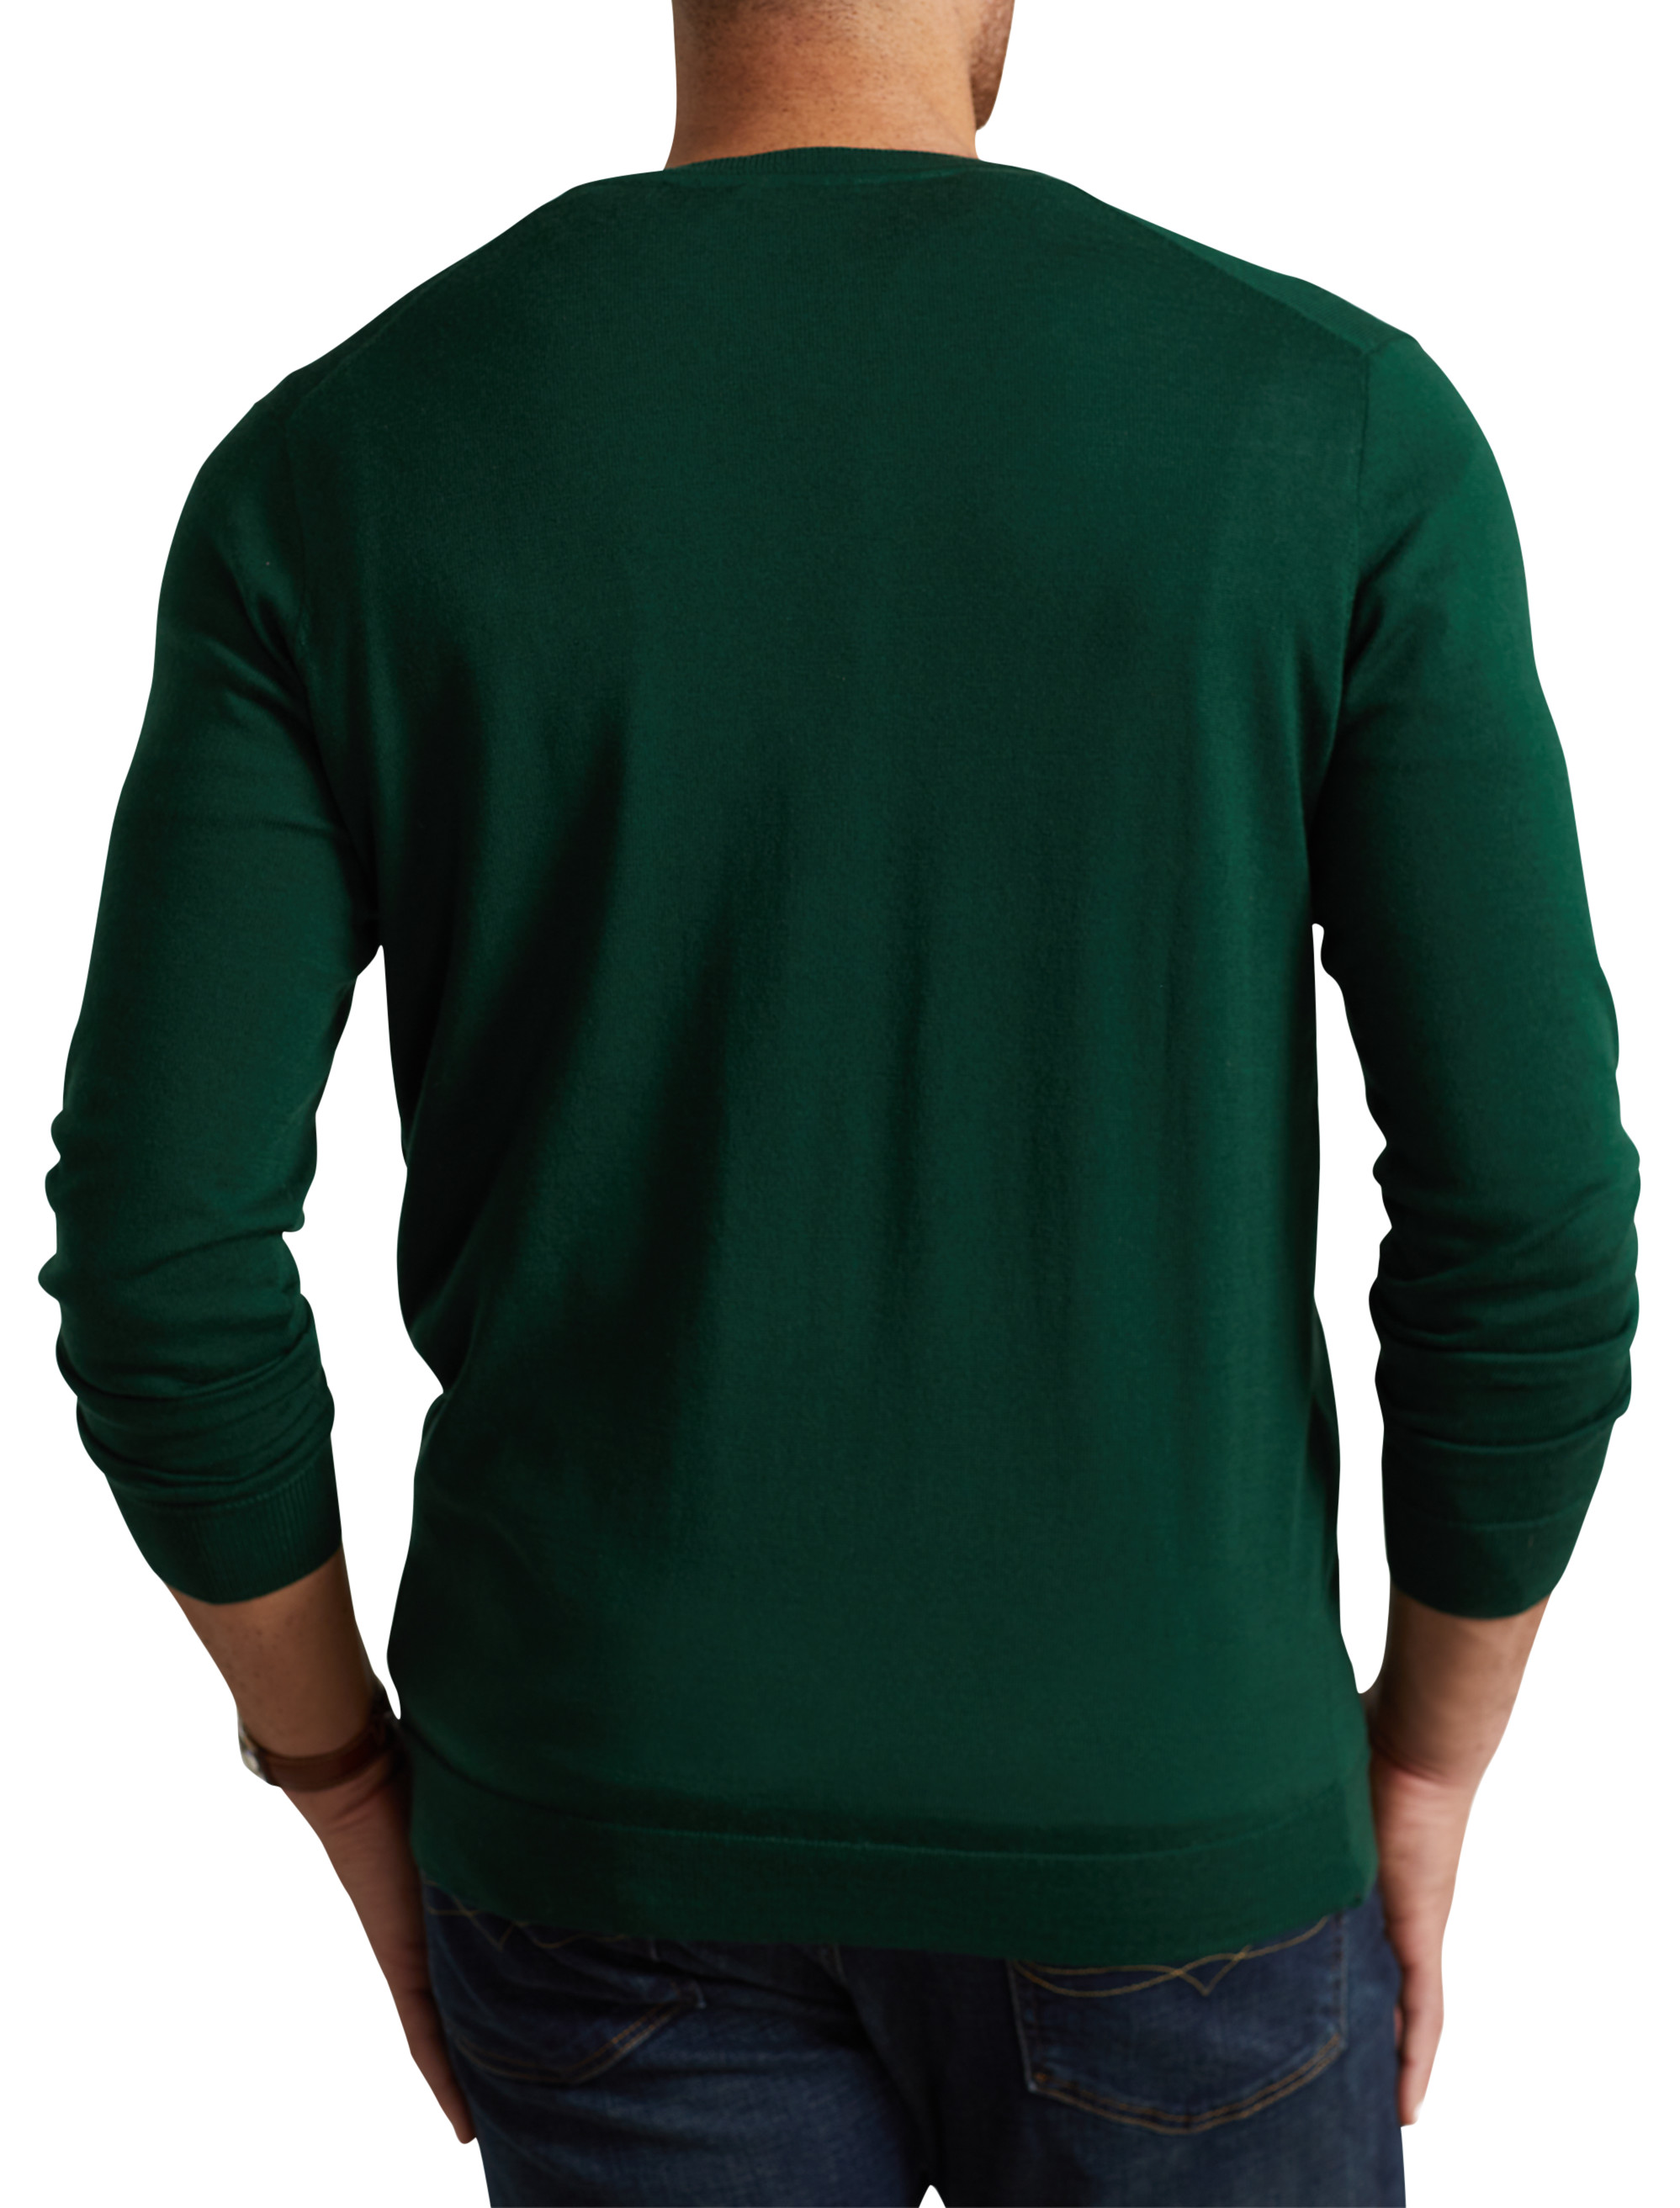 Sweaters Big & Tall Clothing For Men, Big & Tall